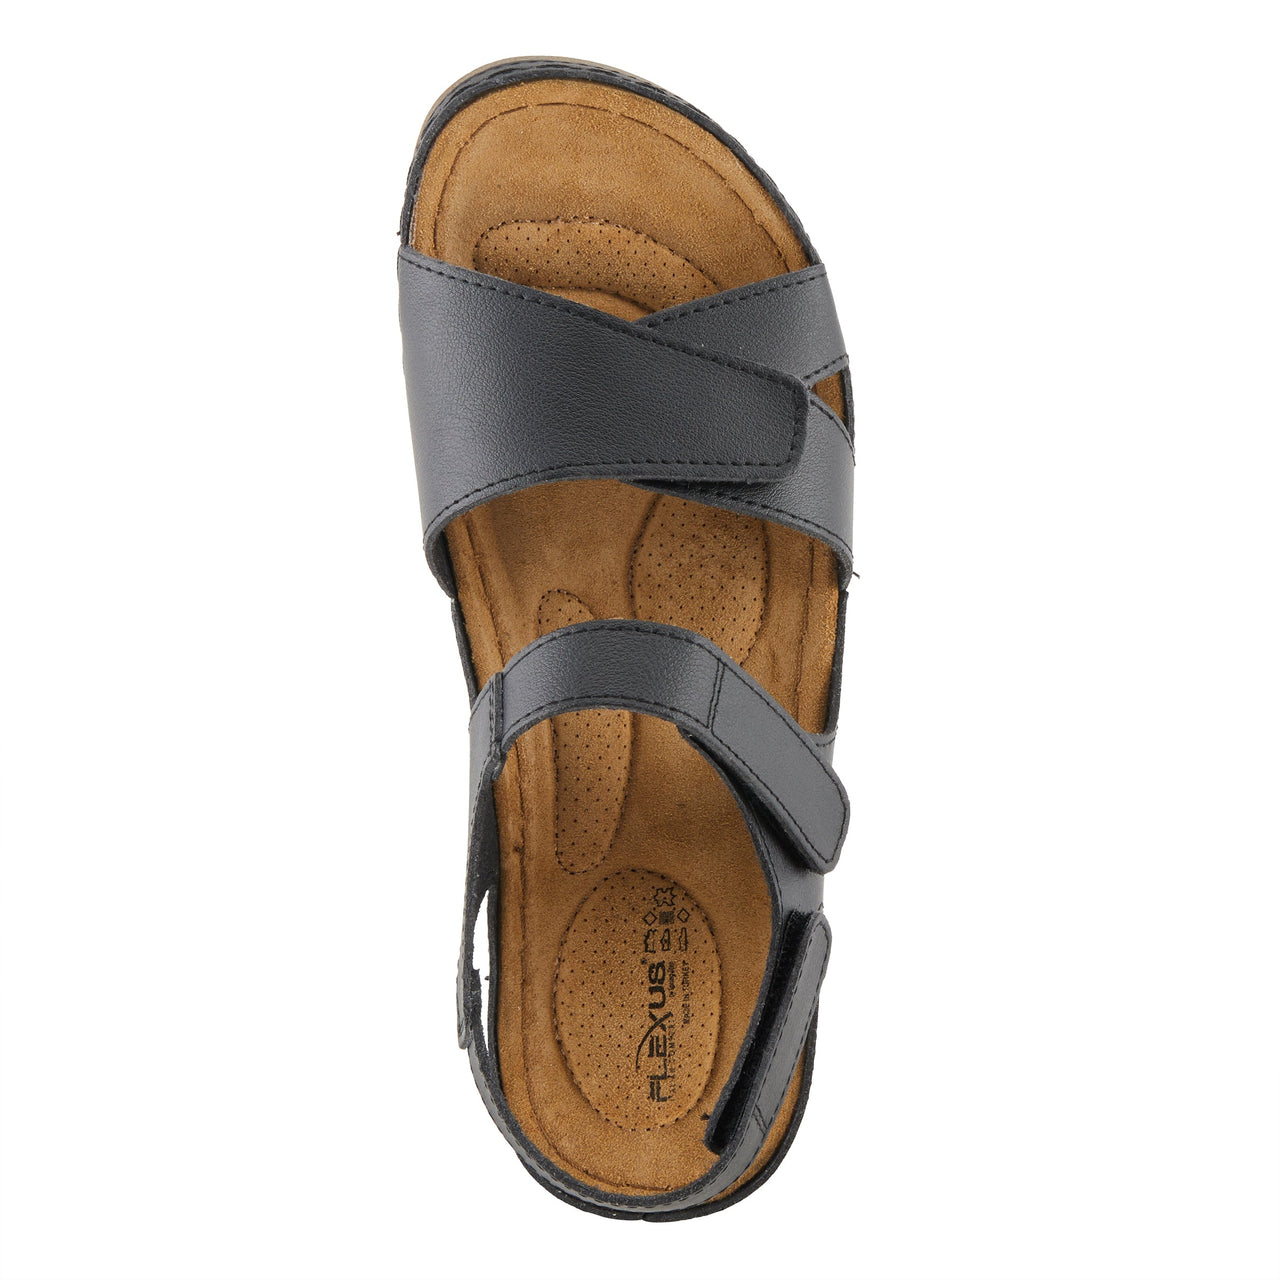 Spring Step Shoes Flexus Ariel Sandals in Teal leather with anatomical cushioned insole